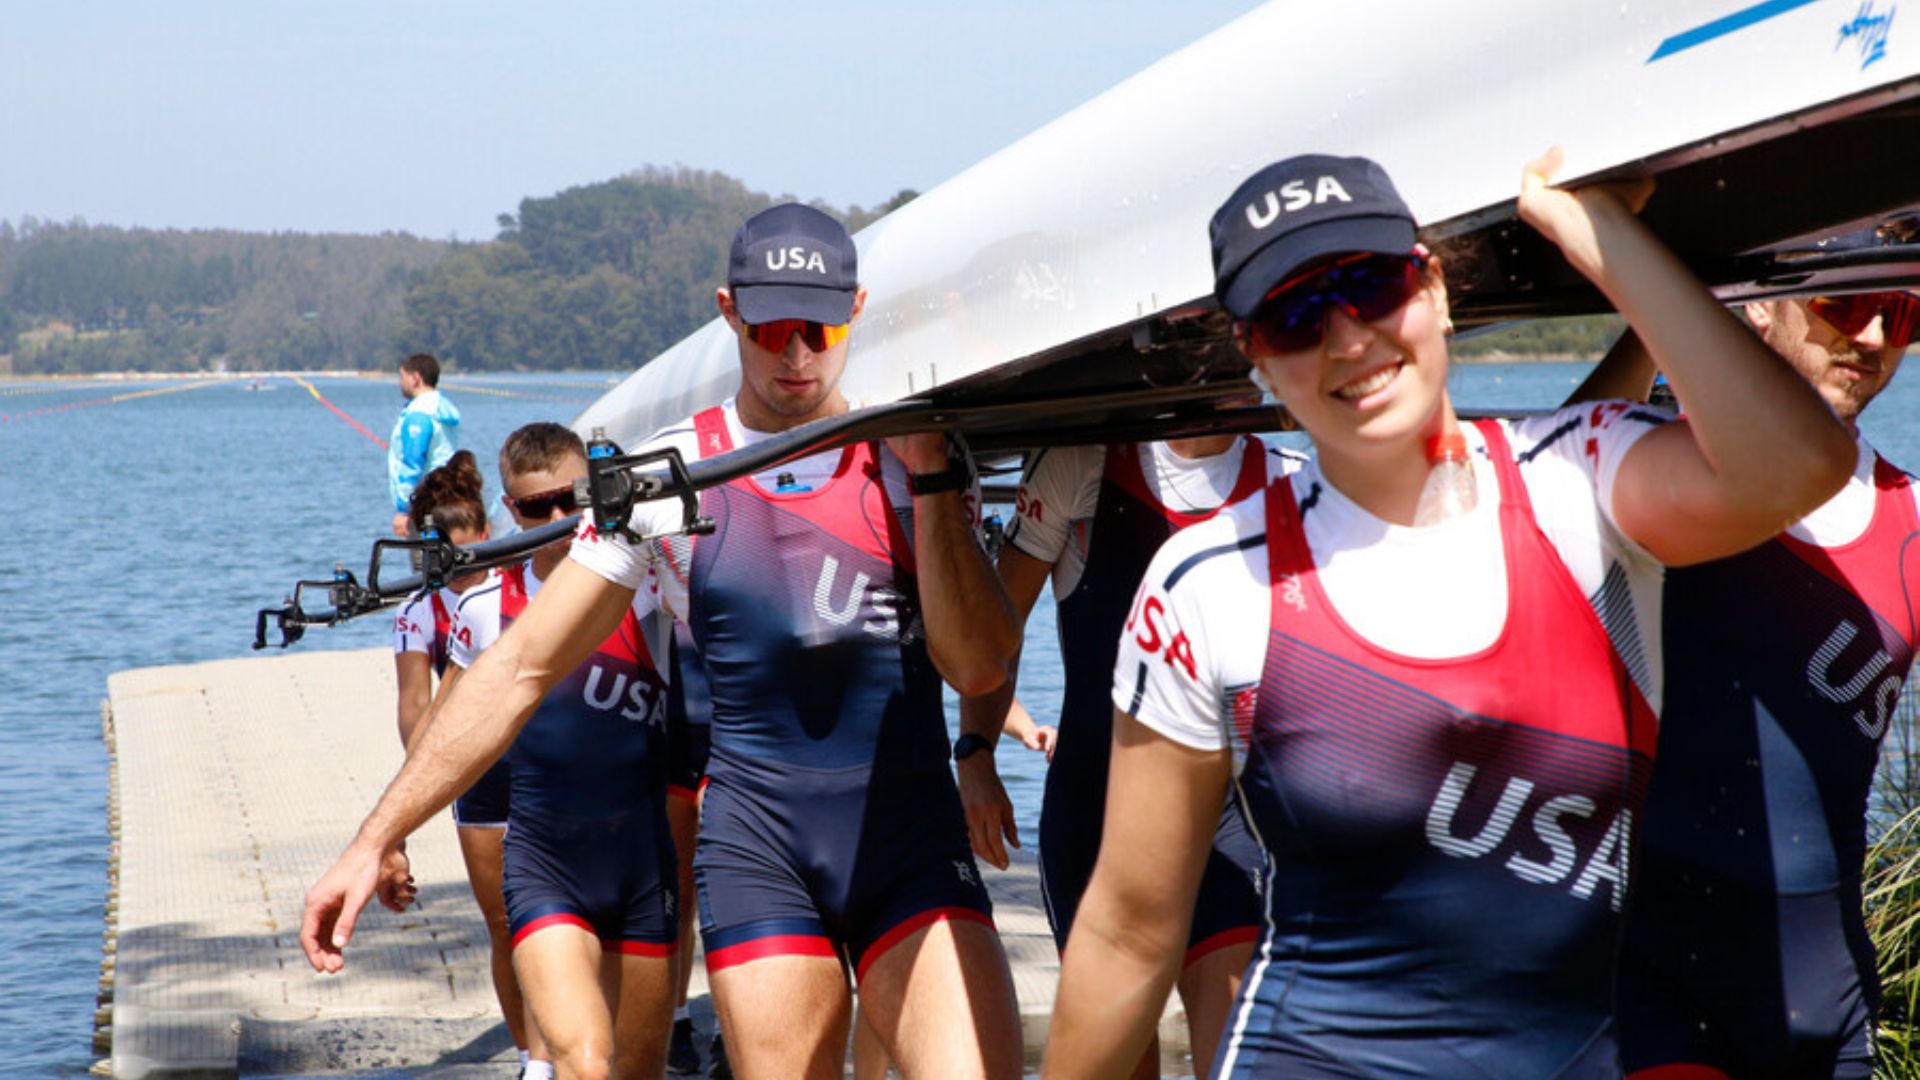 United States wins the Mixed Eight with Coxswain and is the Pan American Rowing